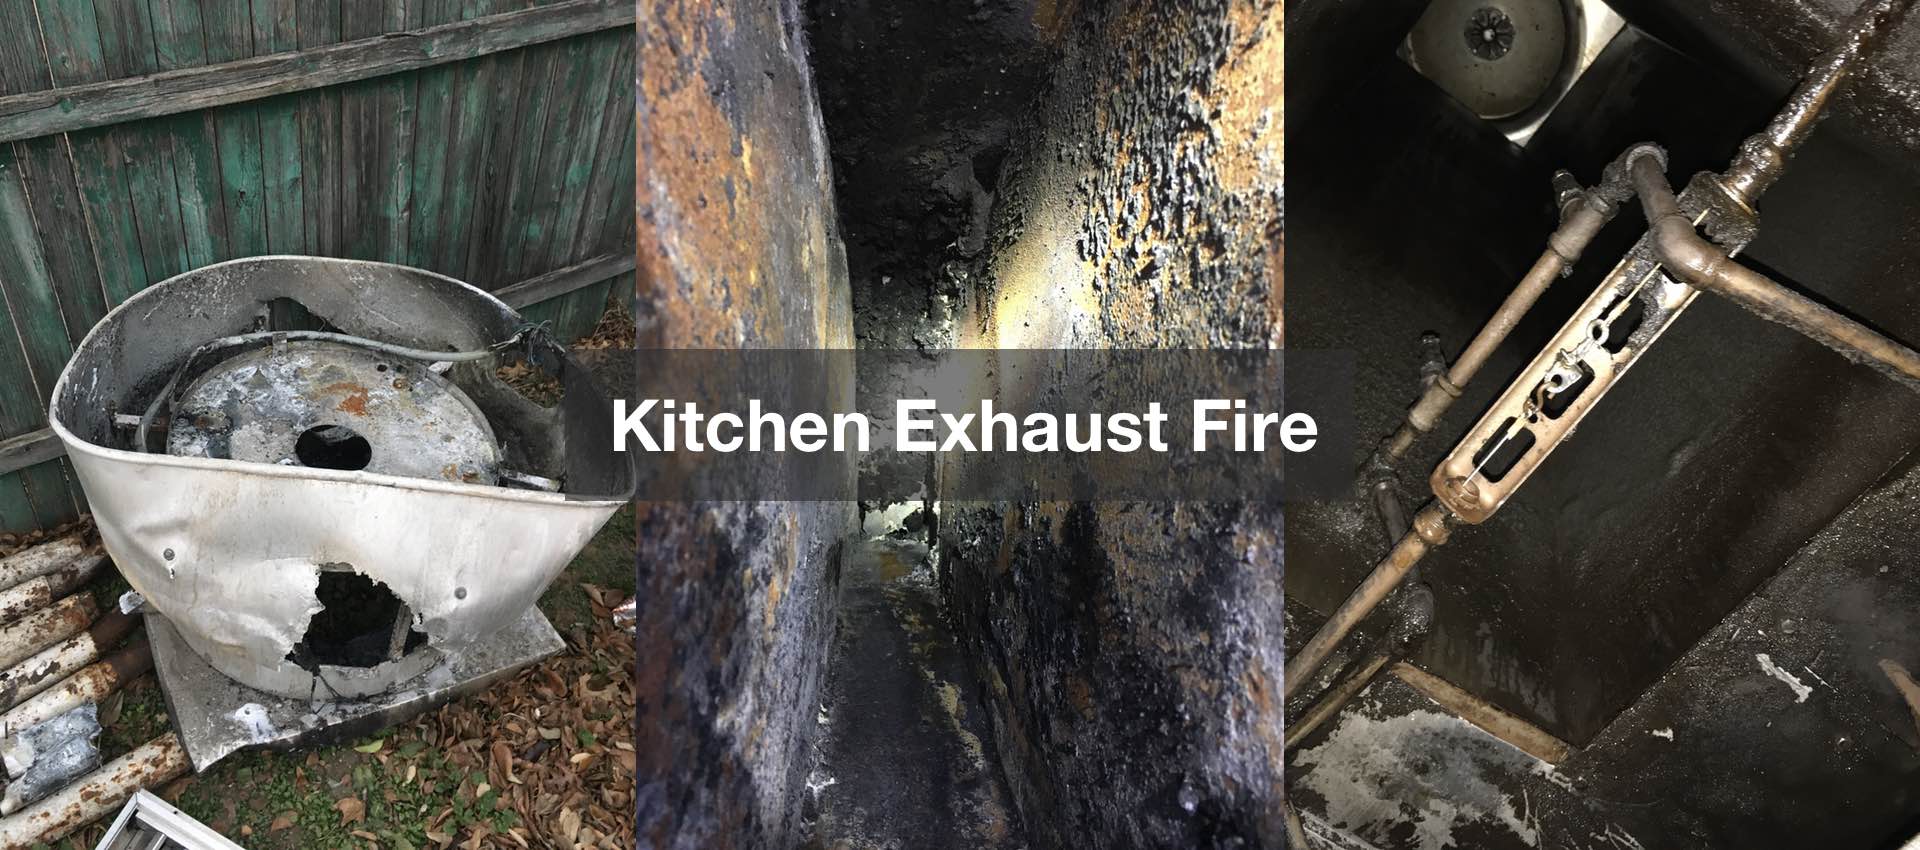 https://www.halorestorationservices.com/wp-content/uploads/2017/01/what-happens-when-a-fire-erupts-in-a-kitchen-exhaust-system-photos.jpg